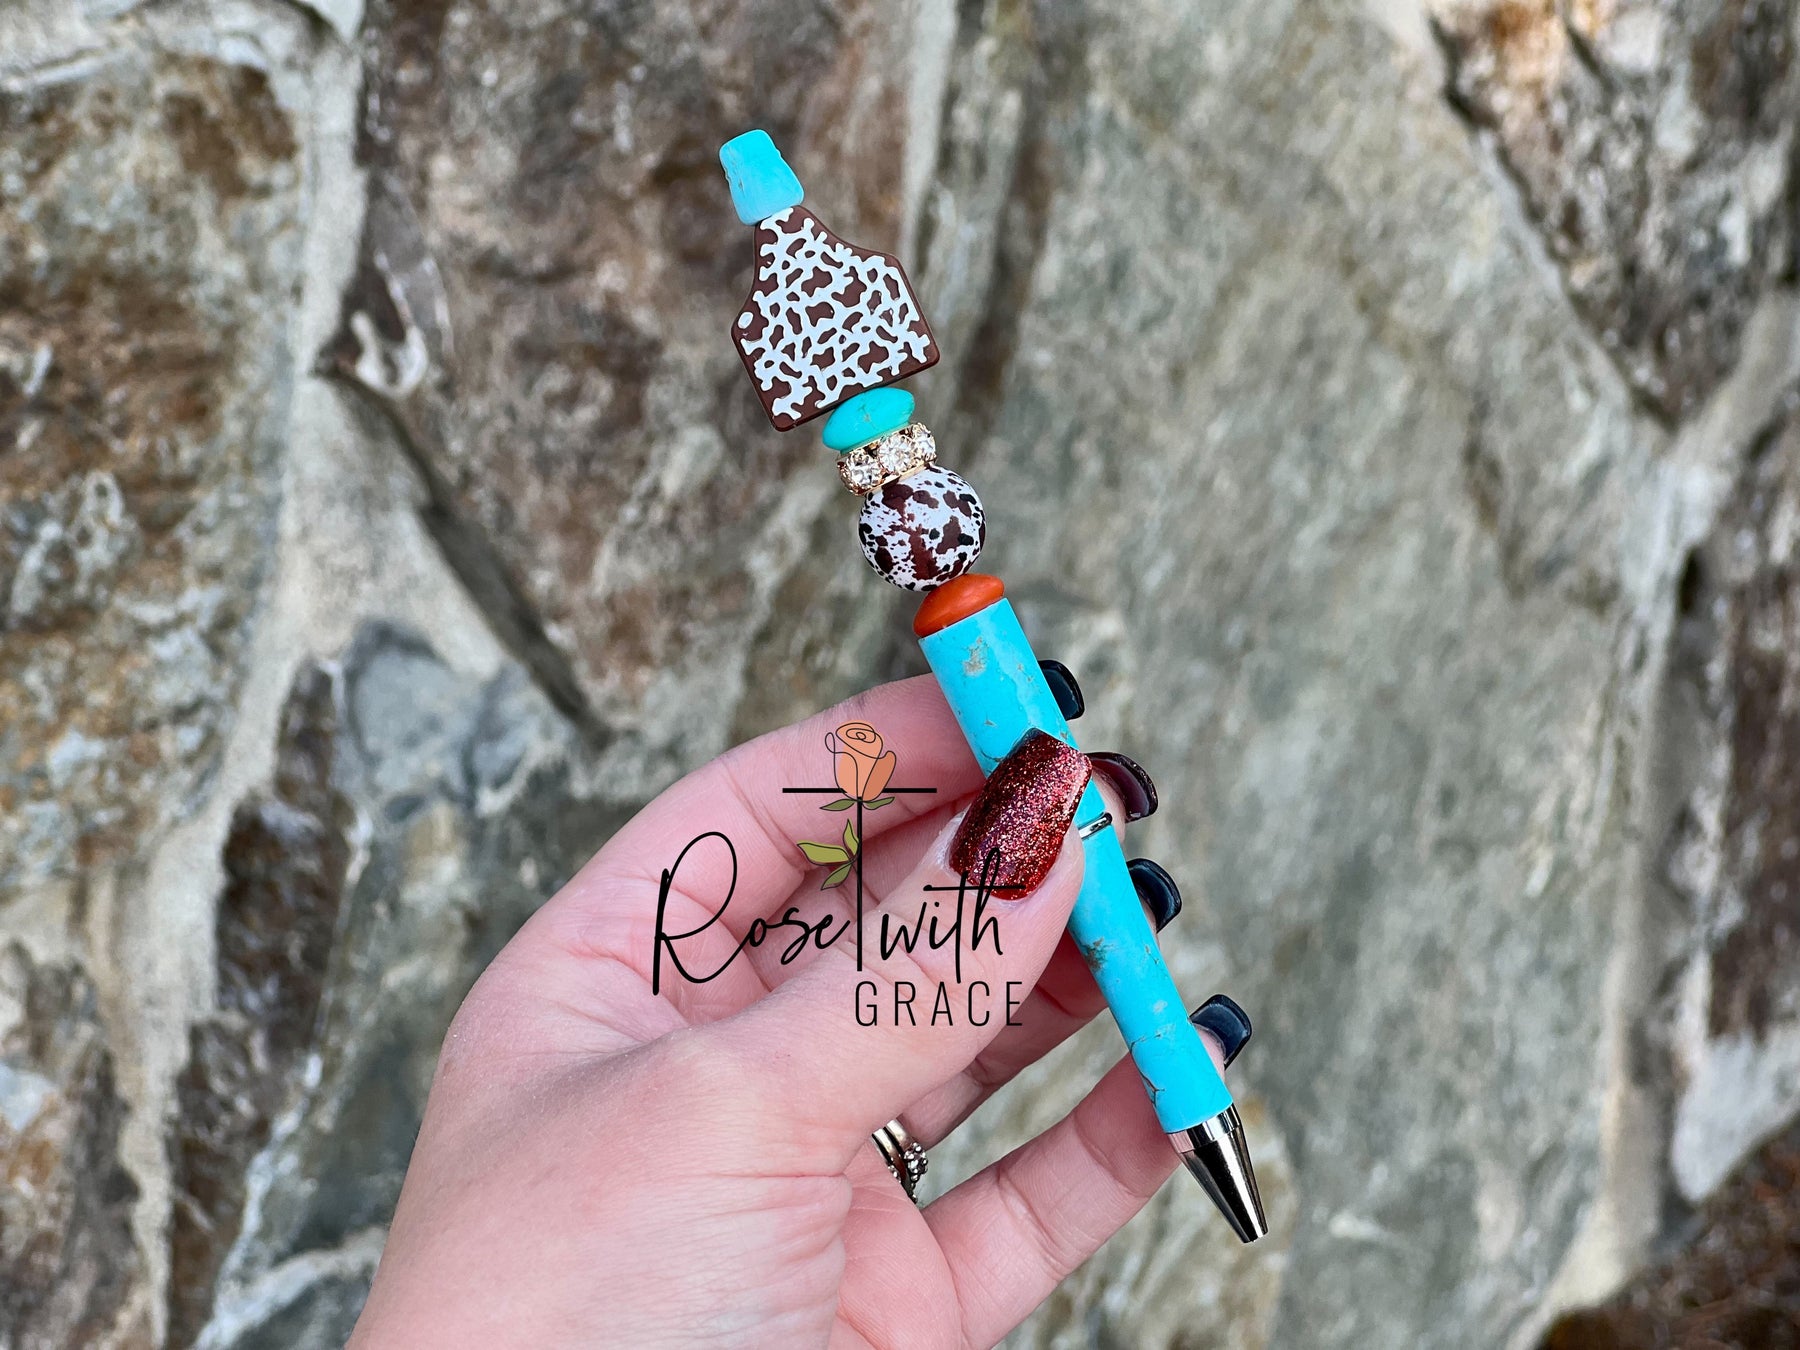 PUNCHY COWGIRL PEN Rose with Grace LLC